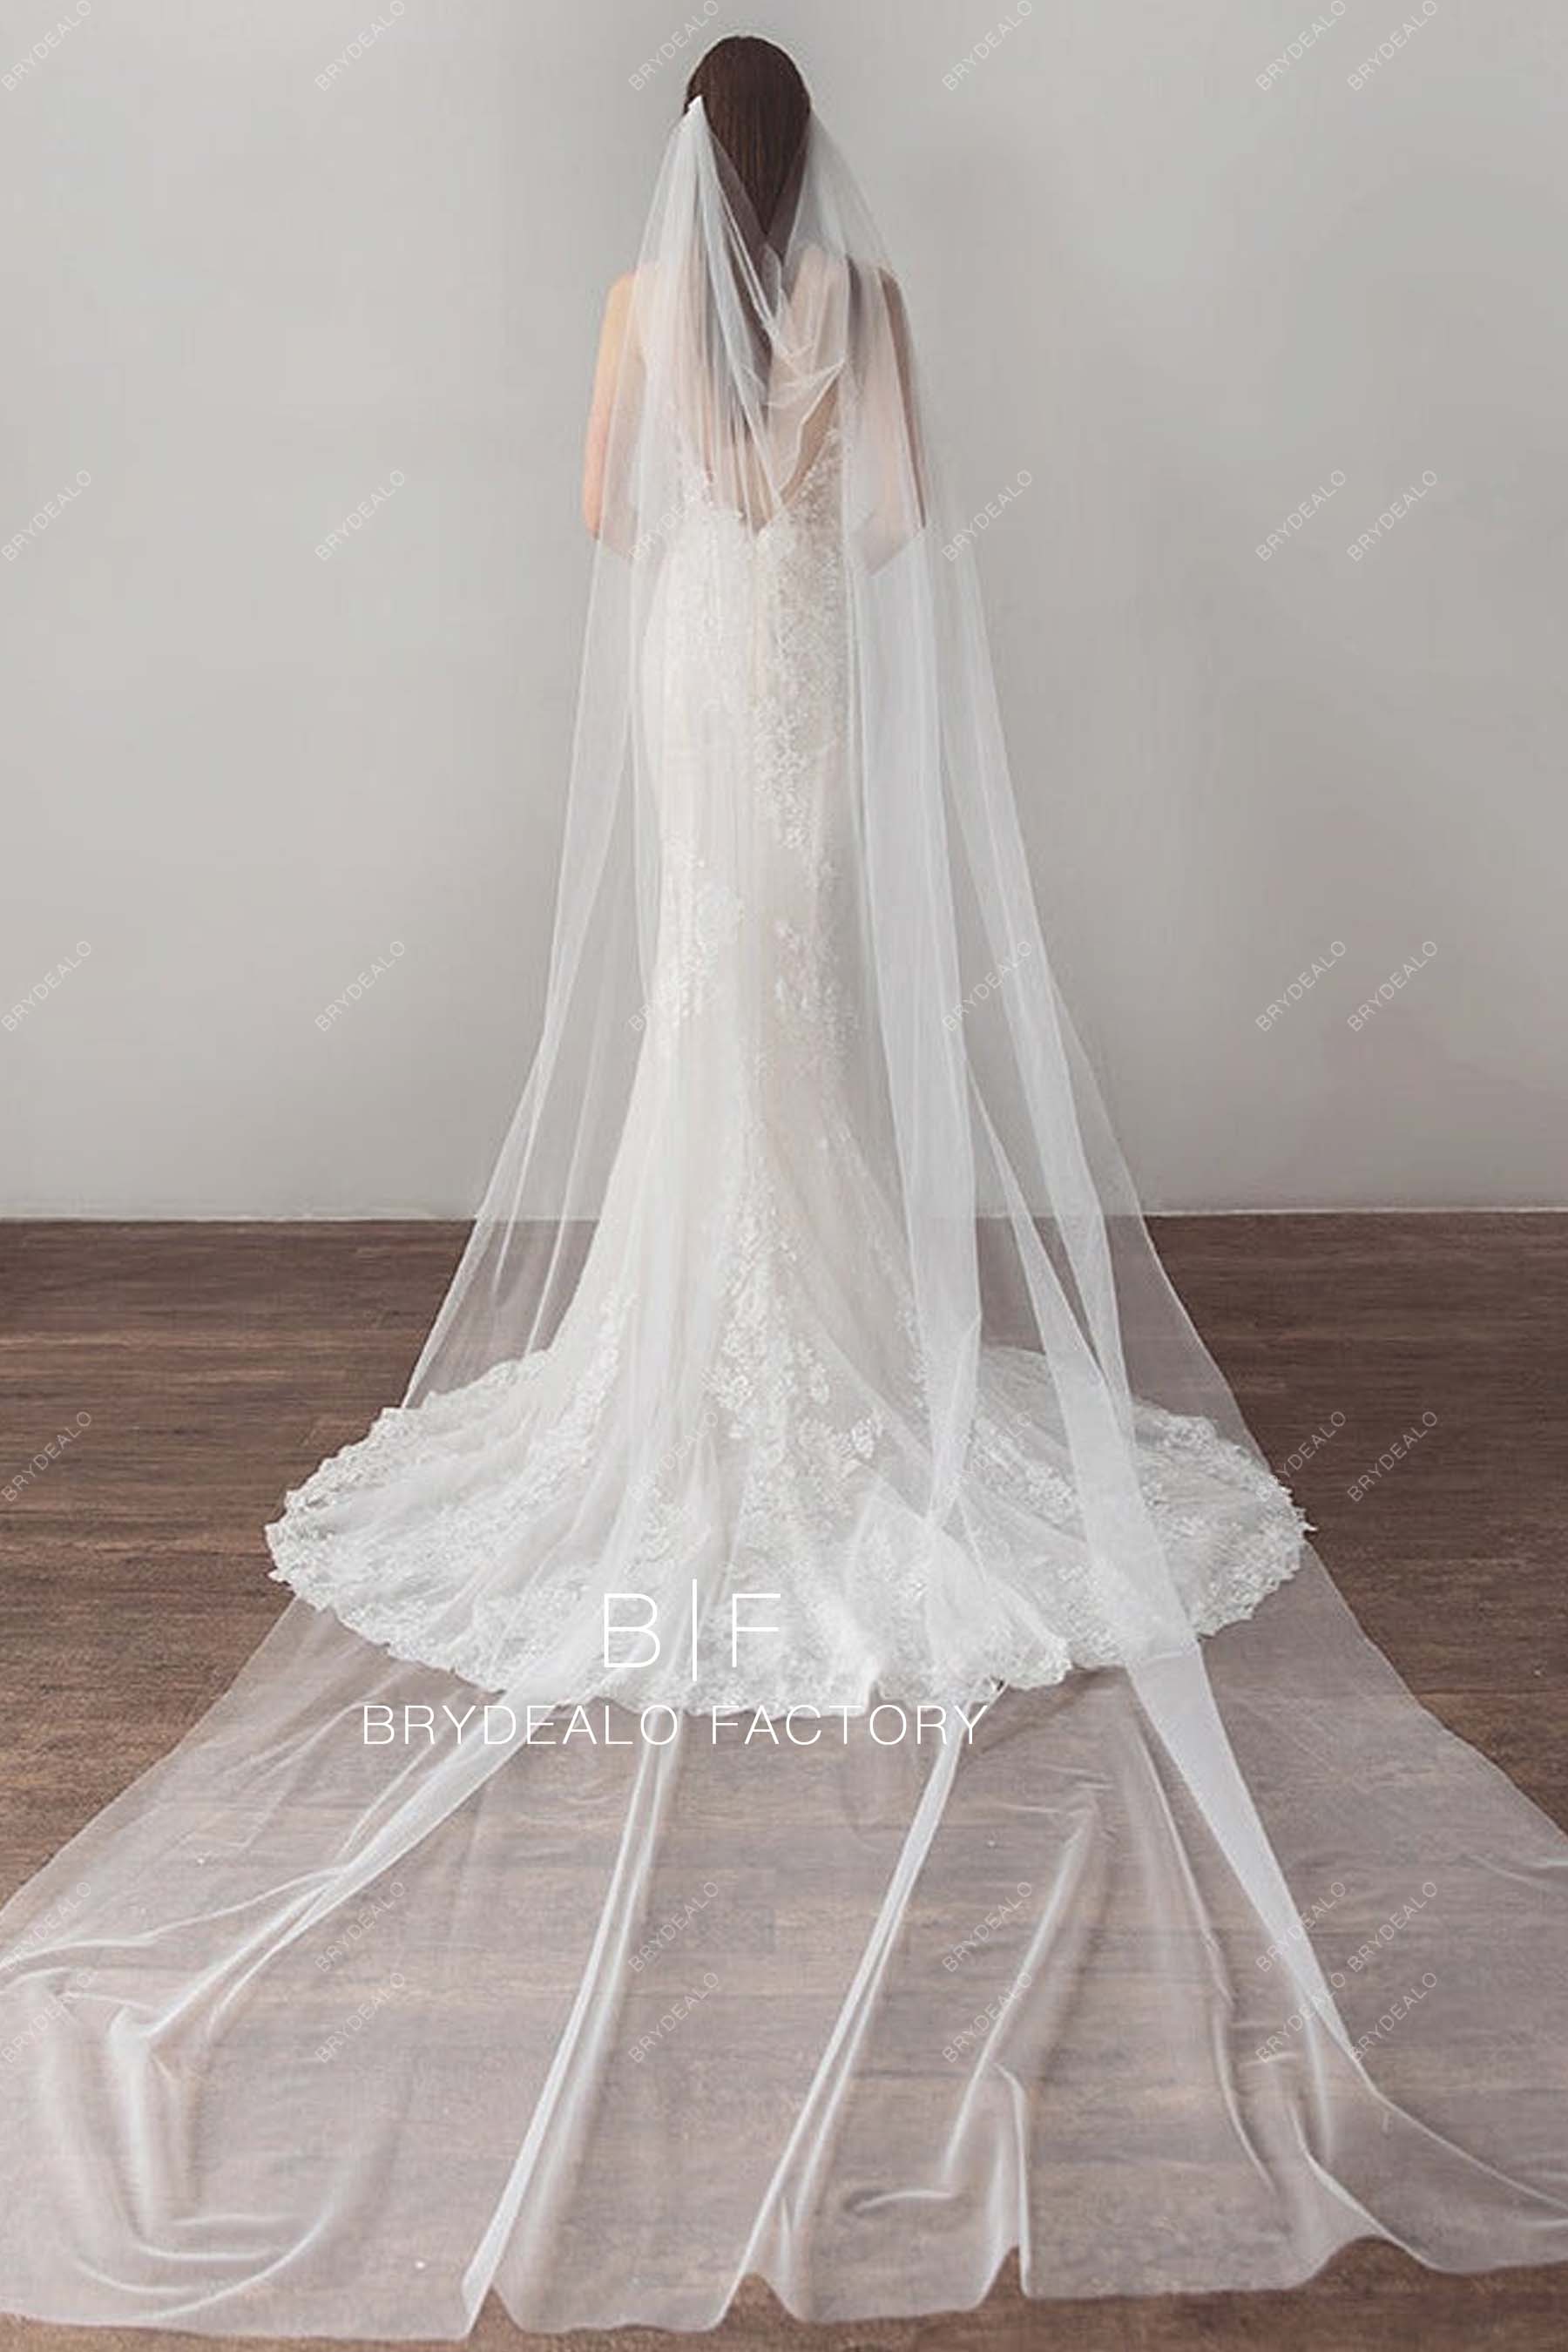 https://cdn.shopify.com/s/files/1/0617/3602/6361/products/cathedral-length-wedding-veil-wholesale-plain-tulle-veil.jpg?v=1676636812&width=1800